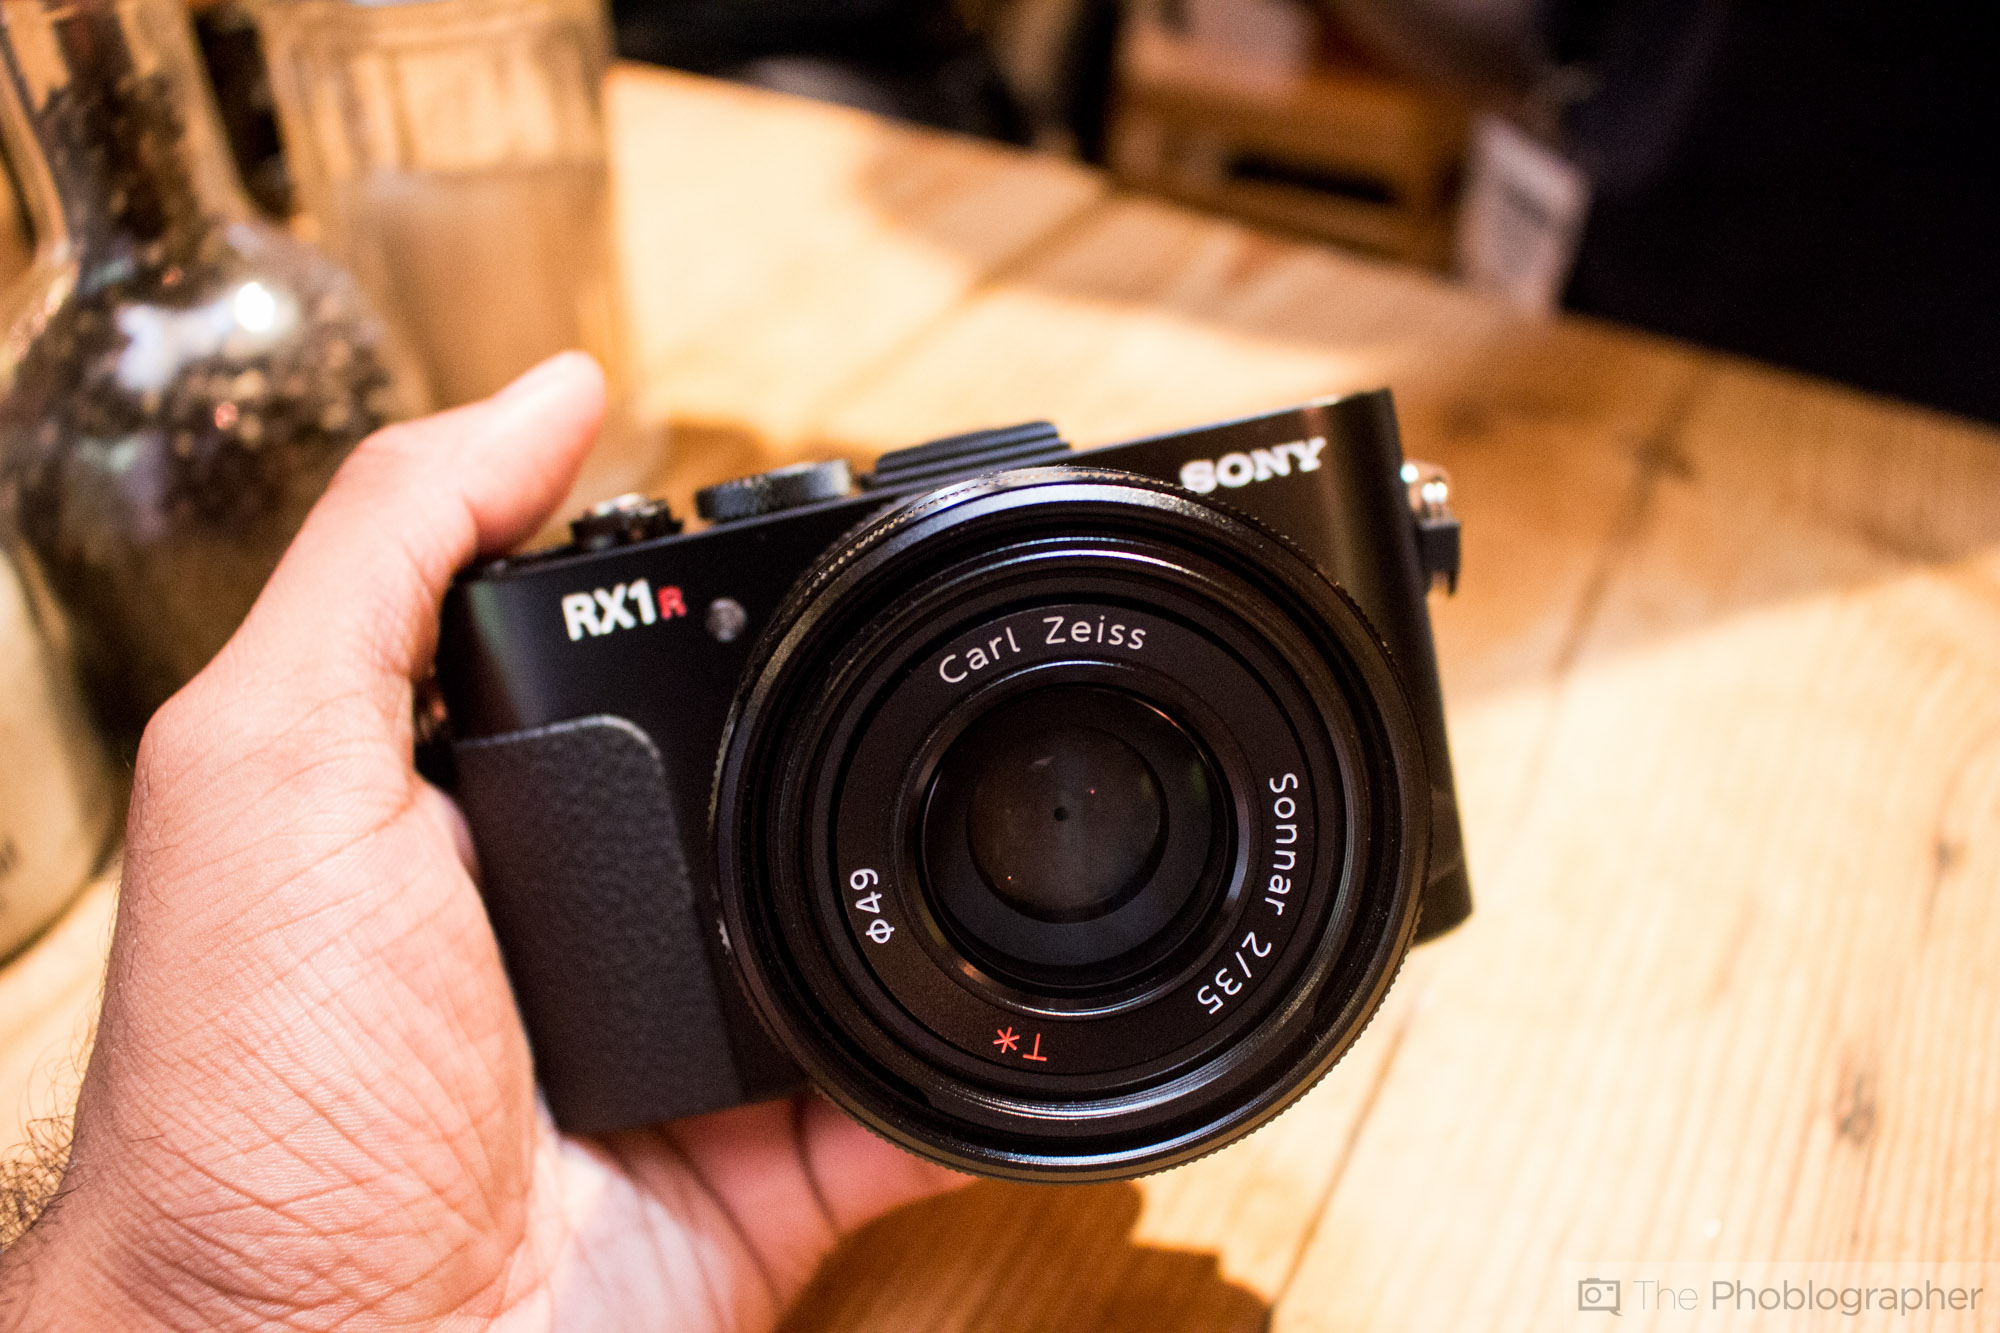 Sony RX2 Reported to Sport a Faster 35mm f1.8 Lens and a Curved Sensor